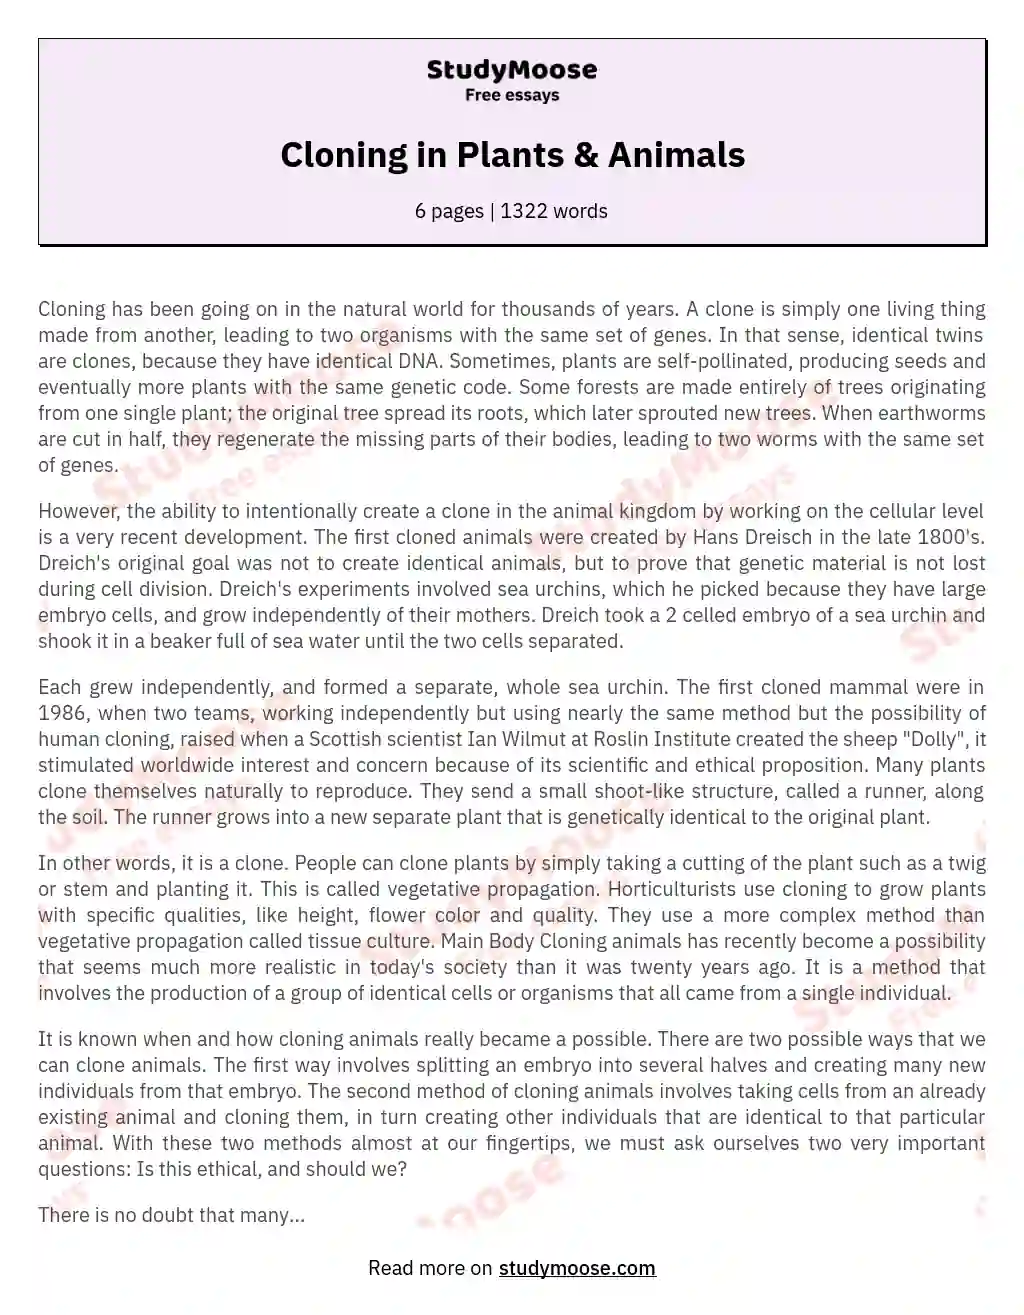 Cloning in Plants & Animals Free Essay Example